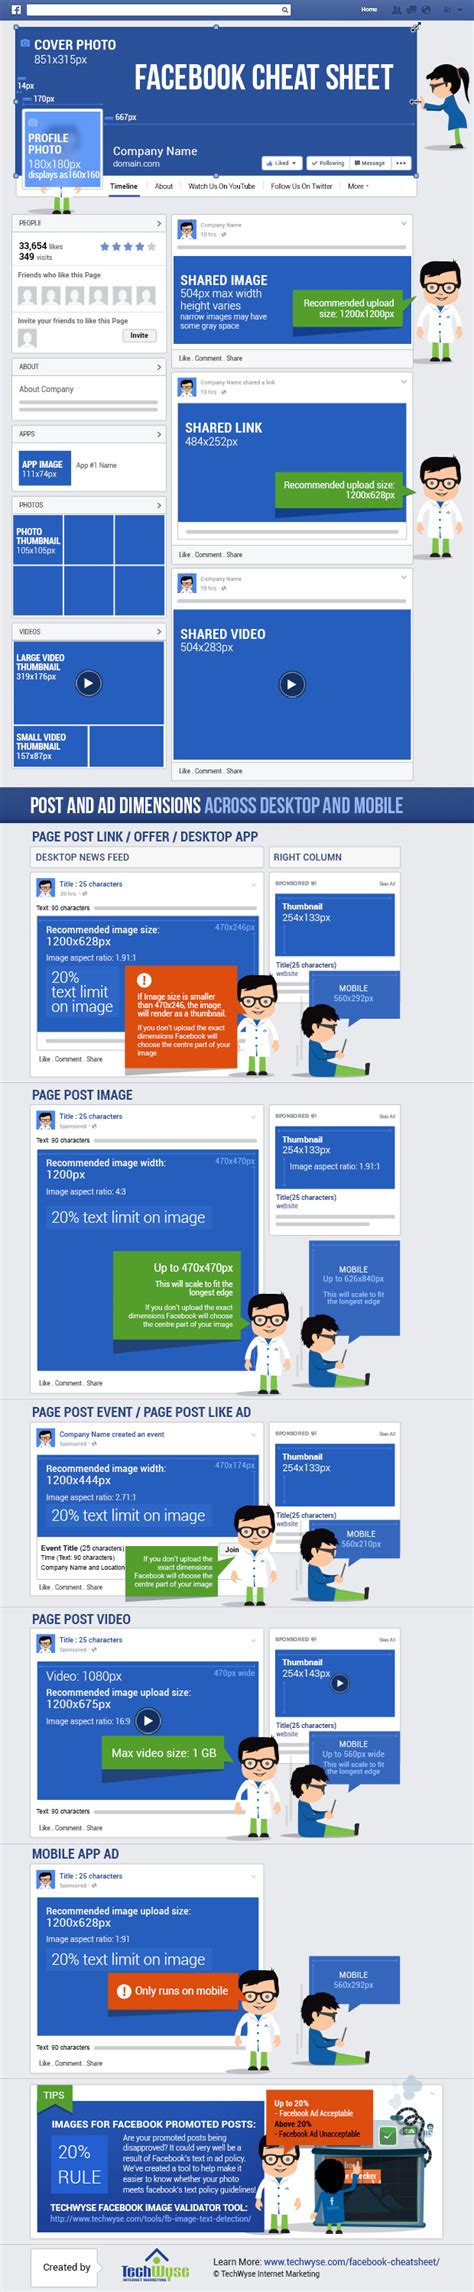 Facebook Cheat Sheet 2015 Ad Image Size And Dimensions Updated